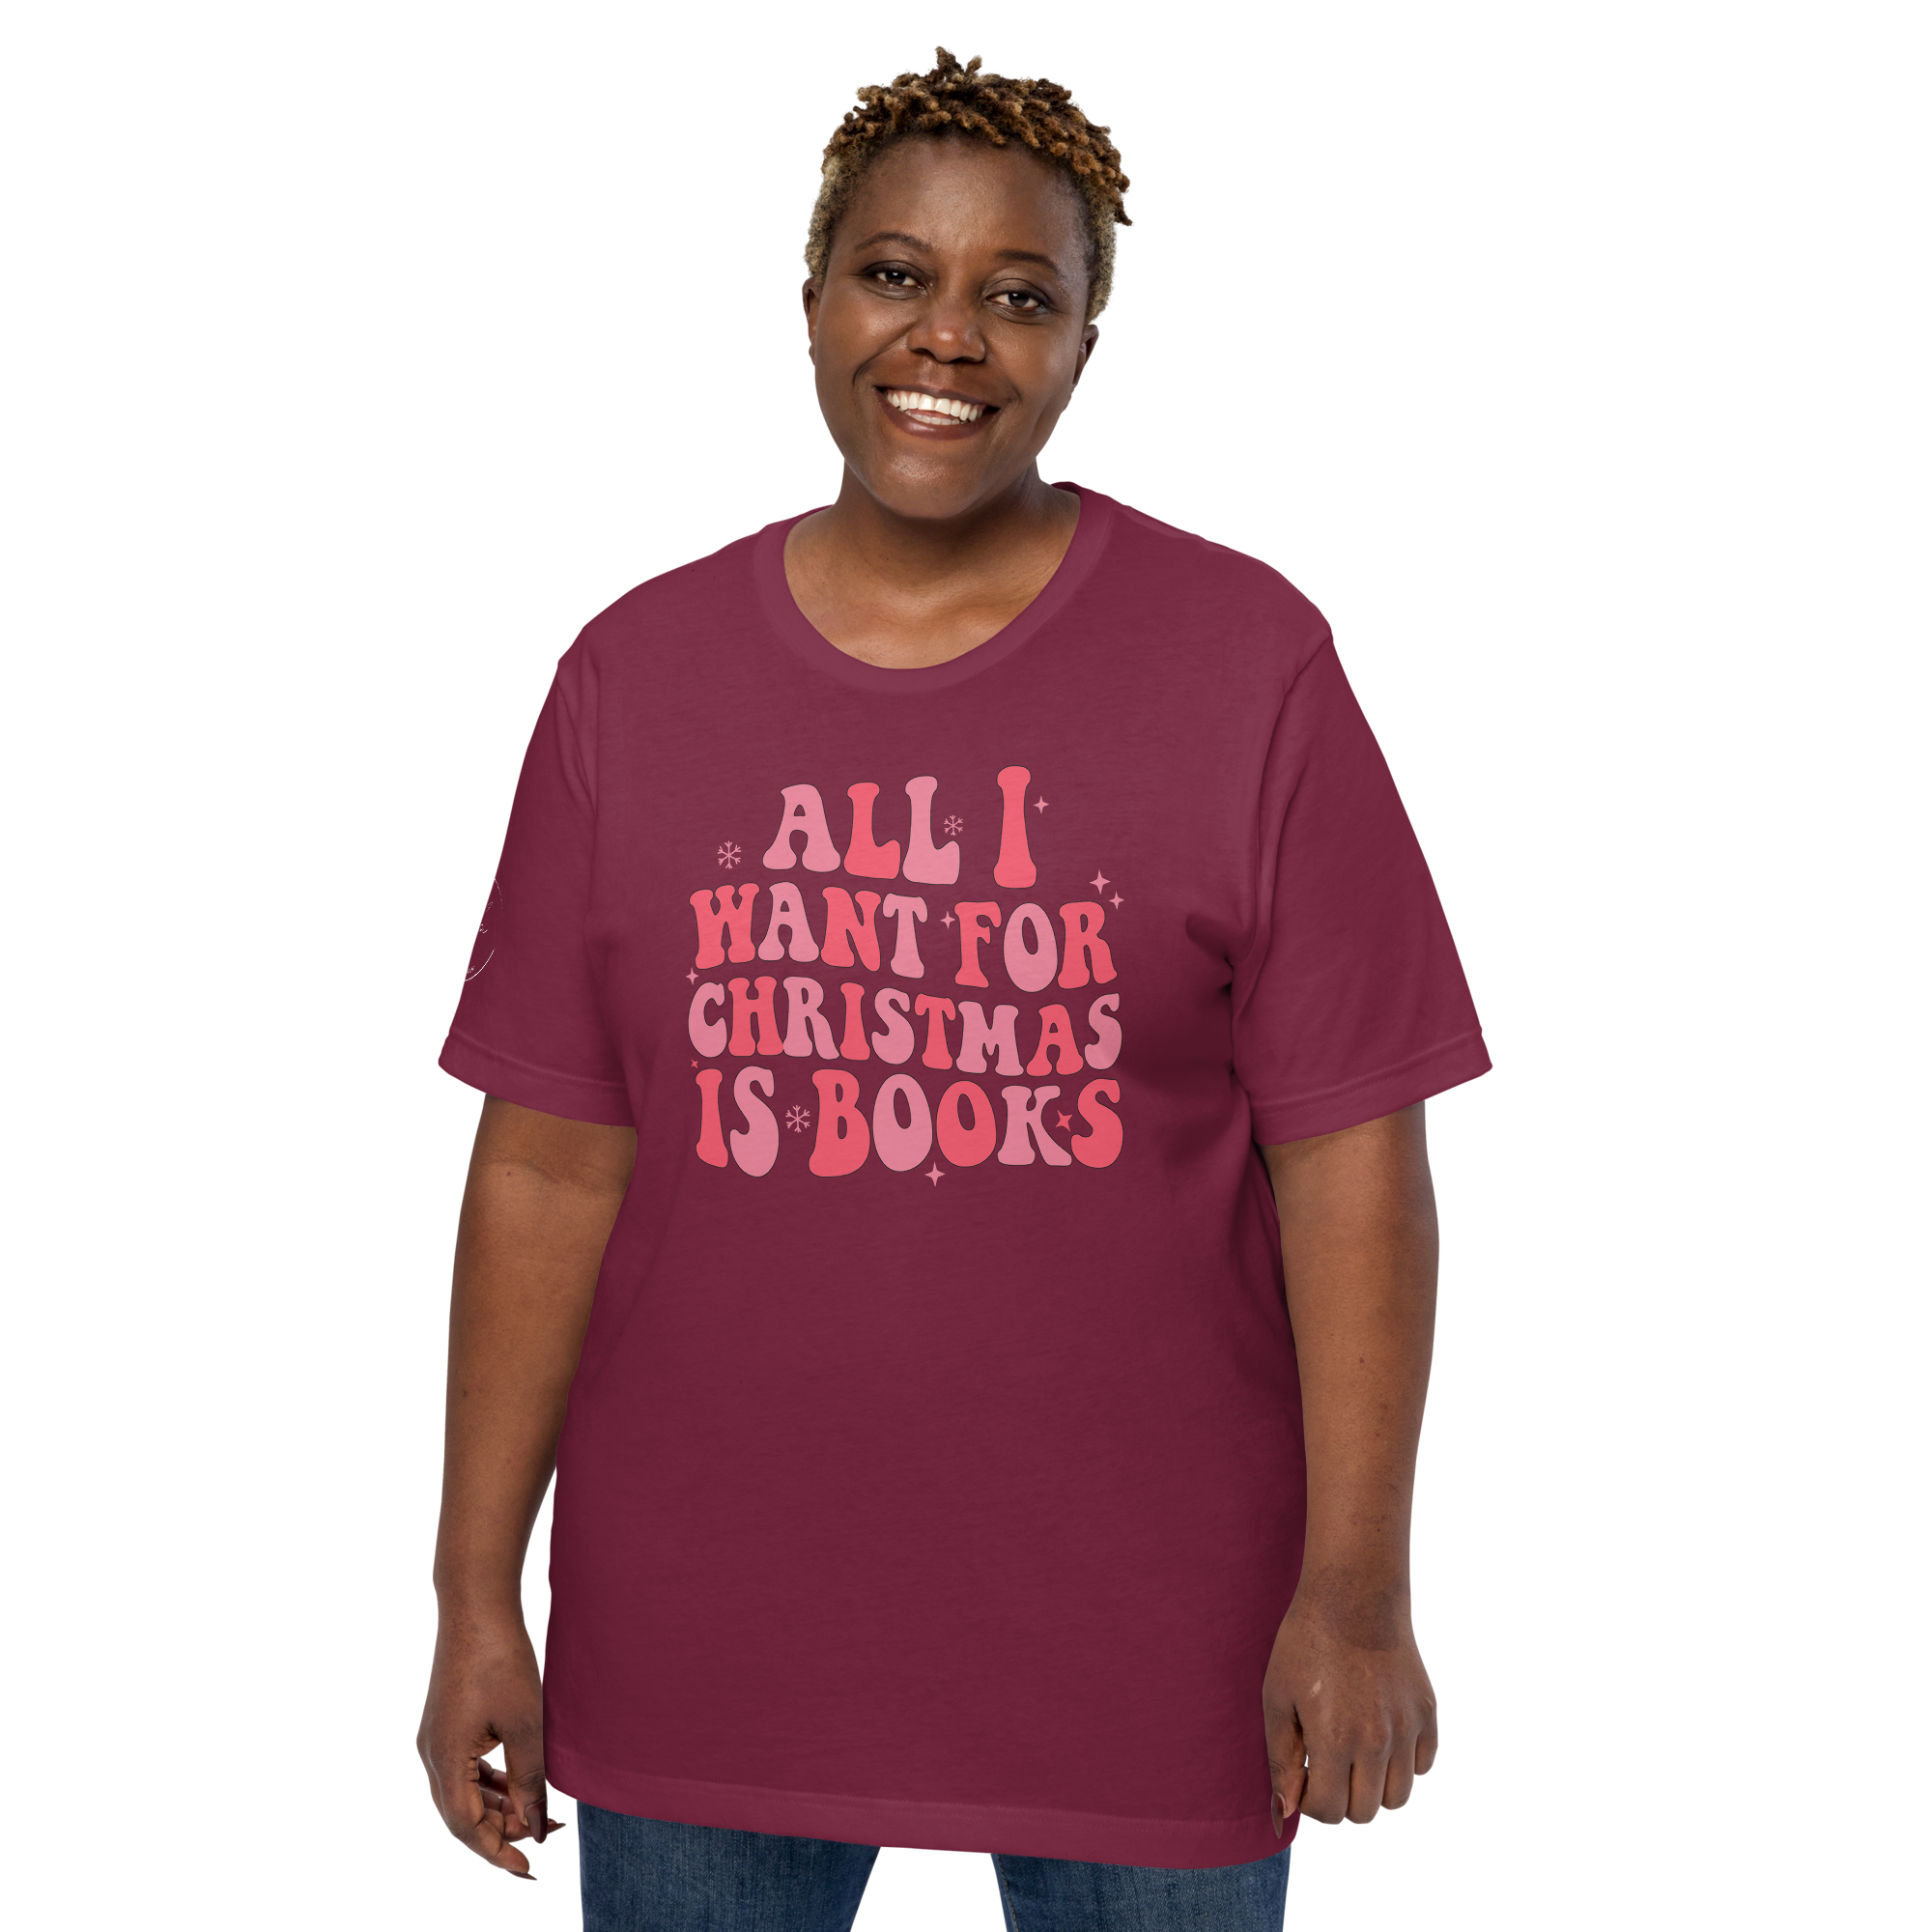 ALL I WANT FOR CHRISTMAS IS BOOKS t-shirt